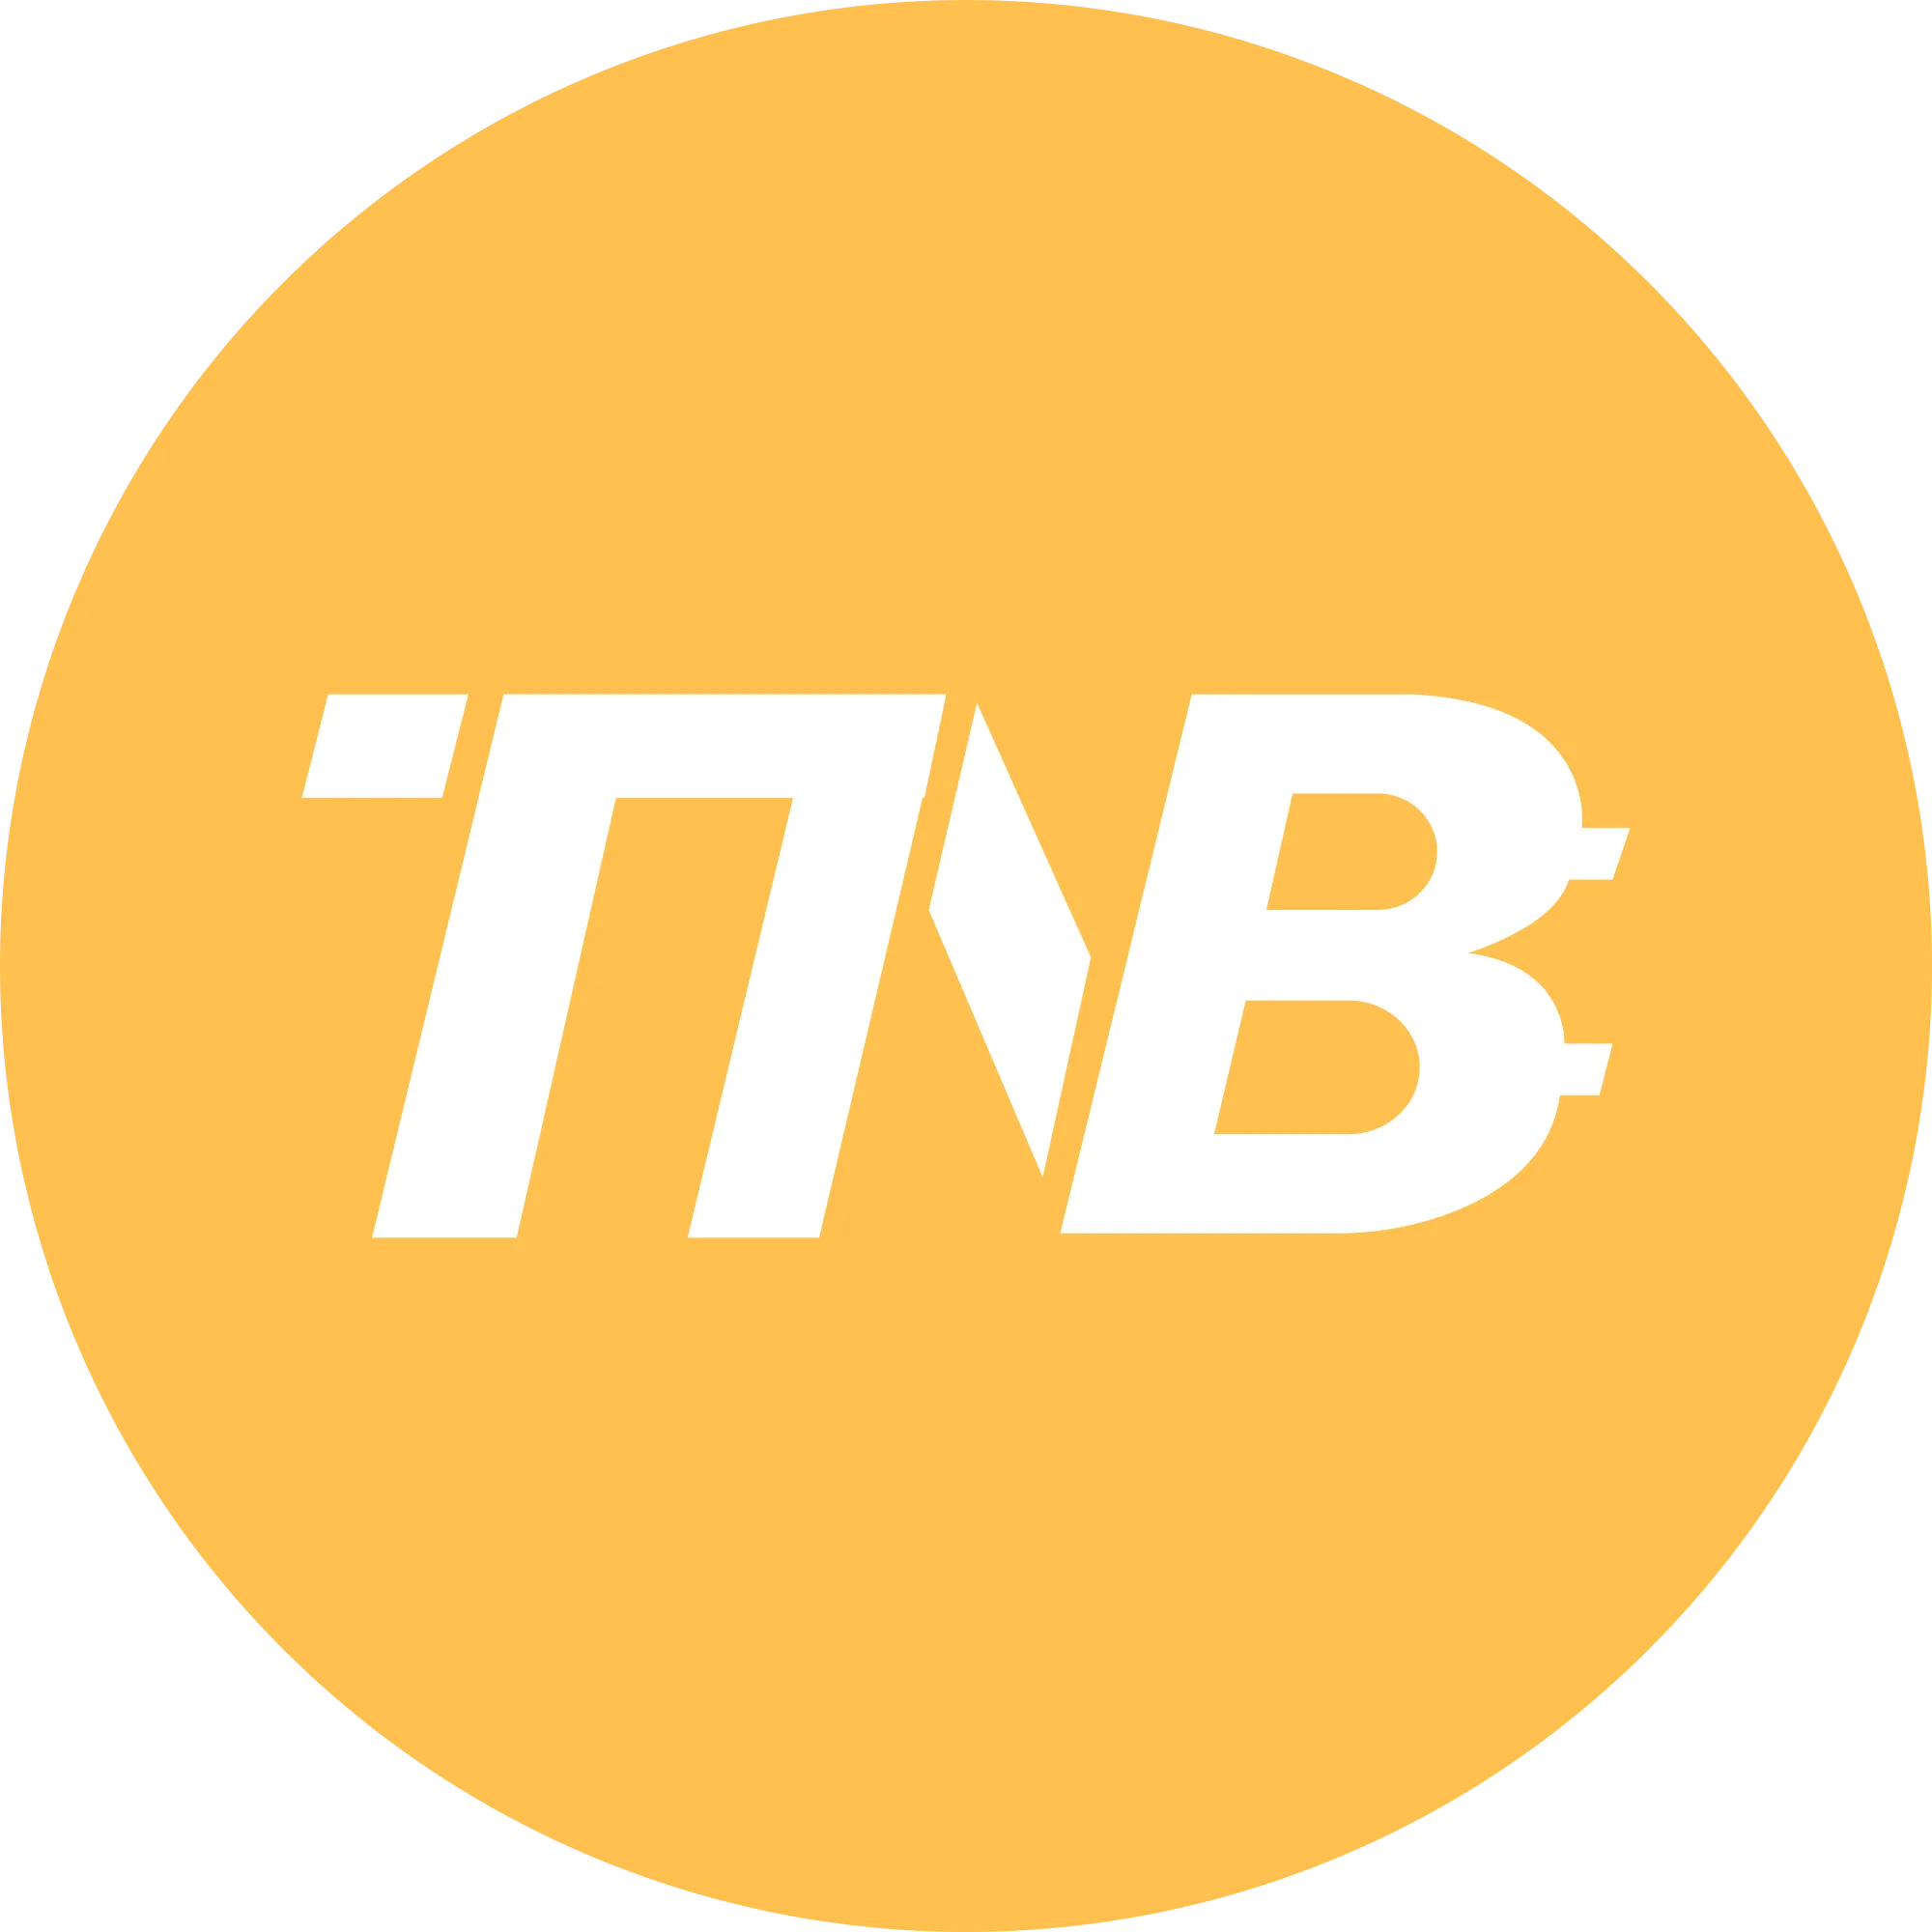 Time New Bank logo in png format